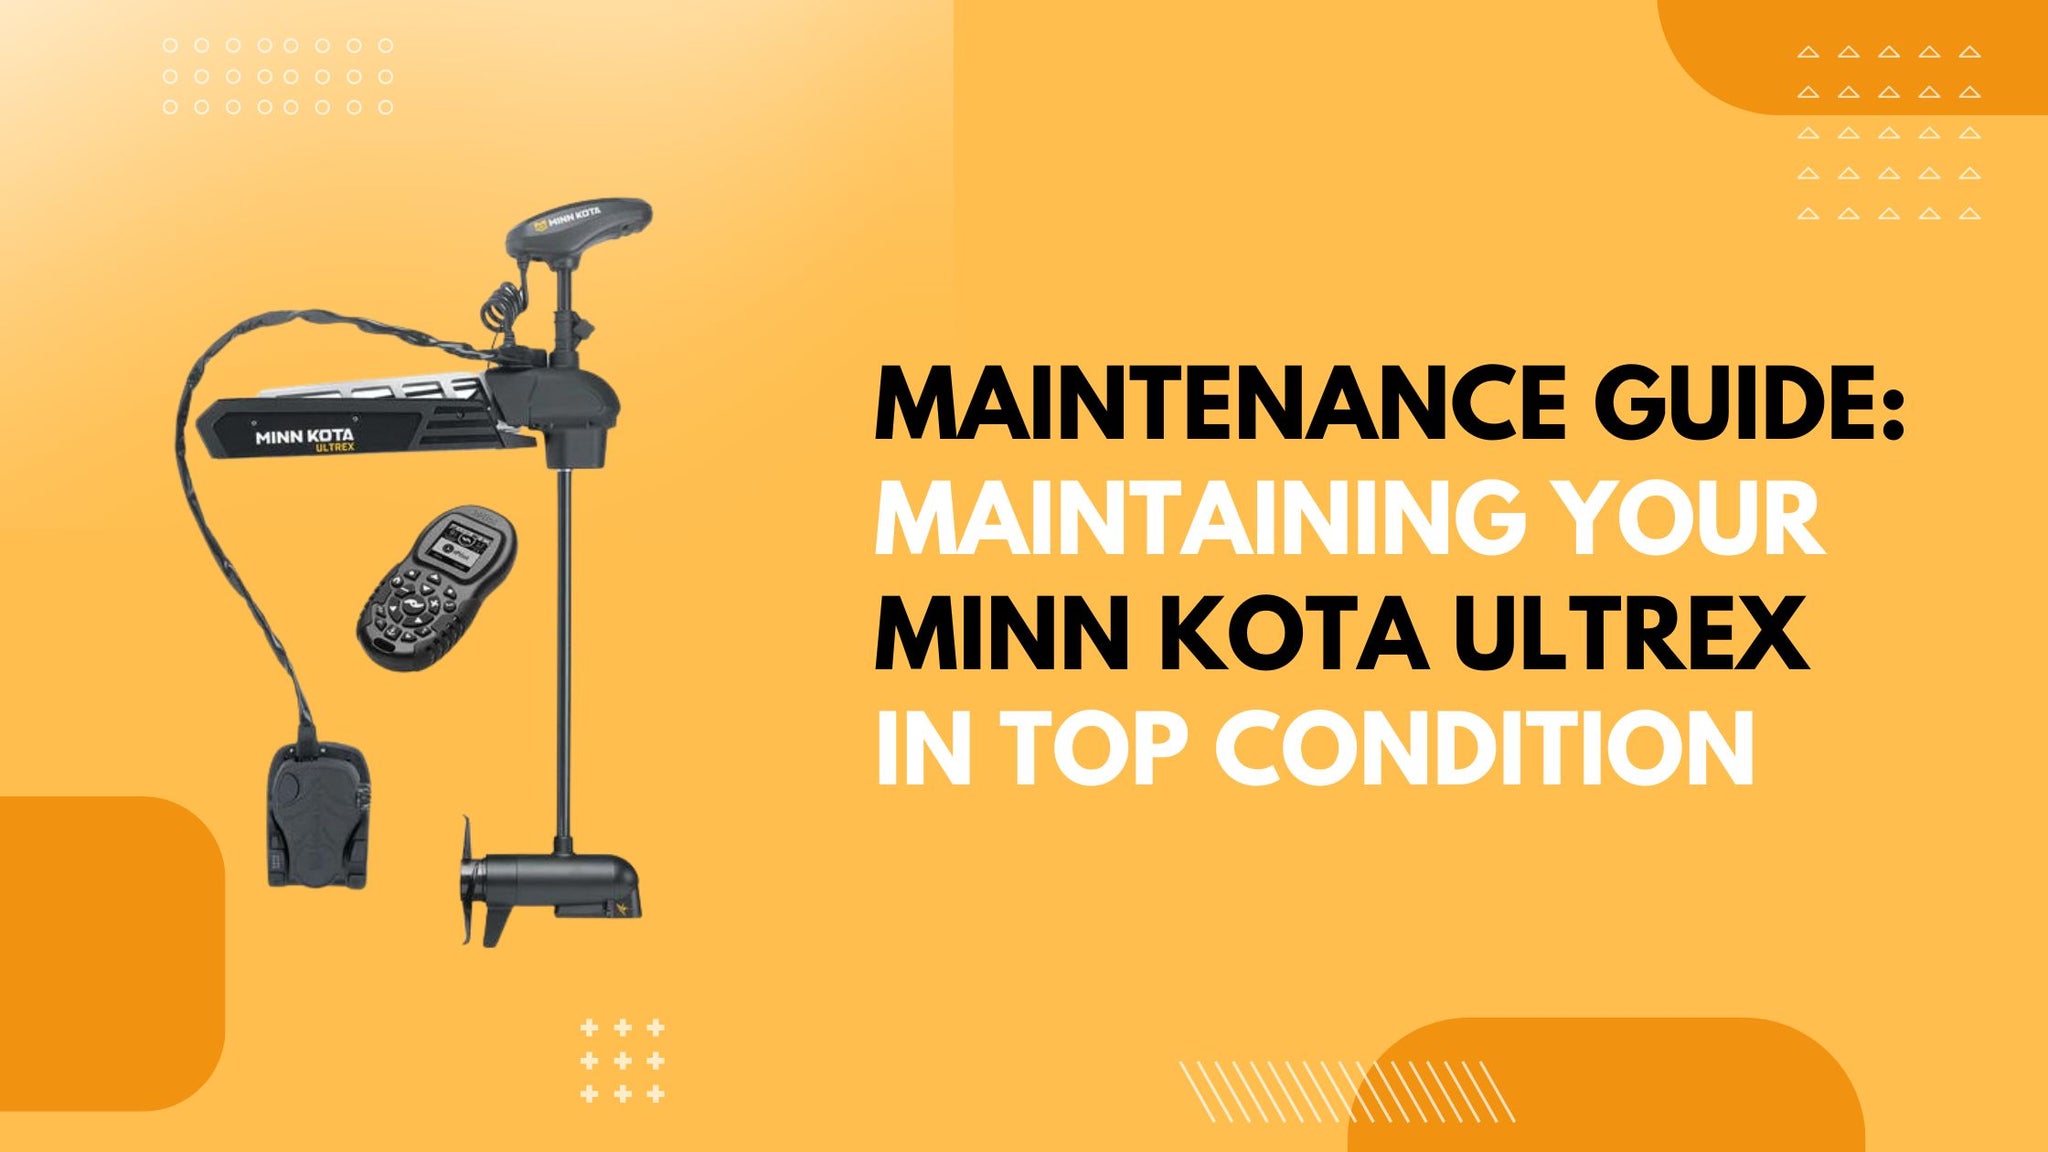 Maintenance Guide: Maintaining Your Minn Kota Ultrex in Top Condition